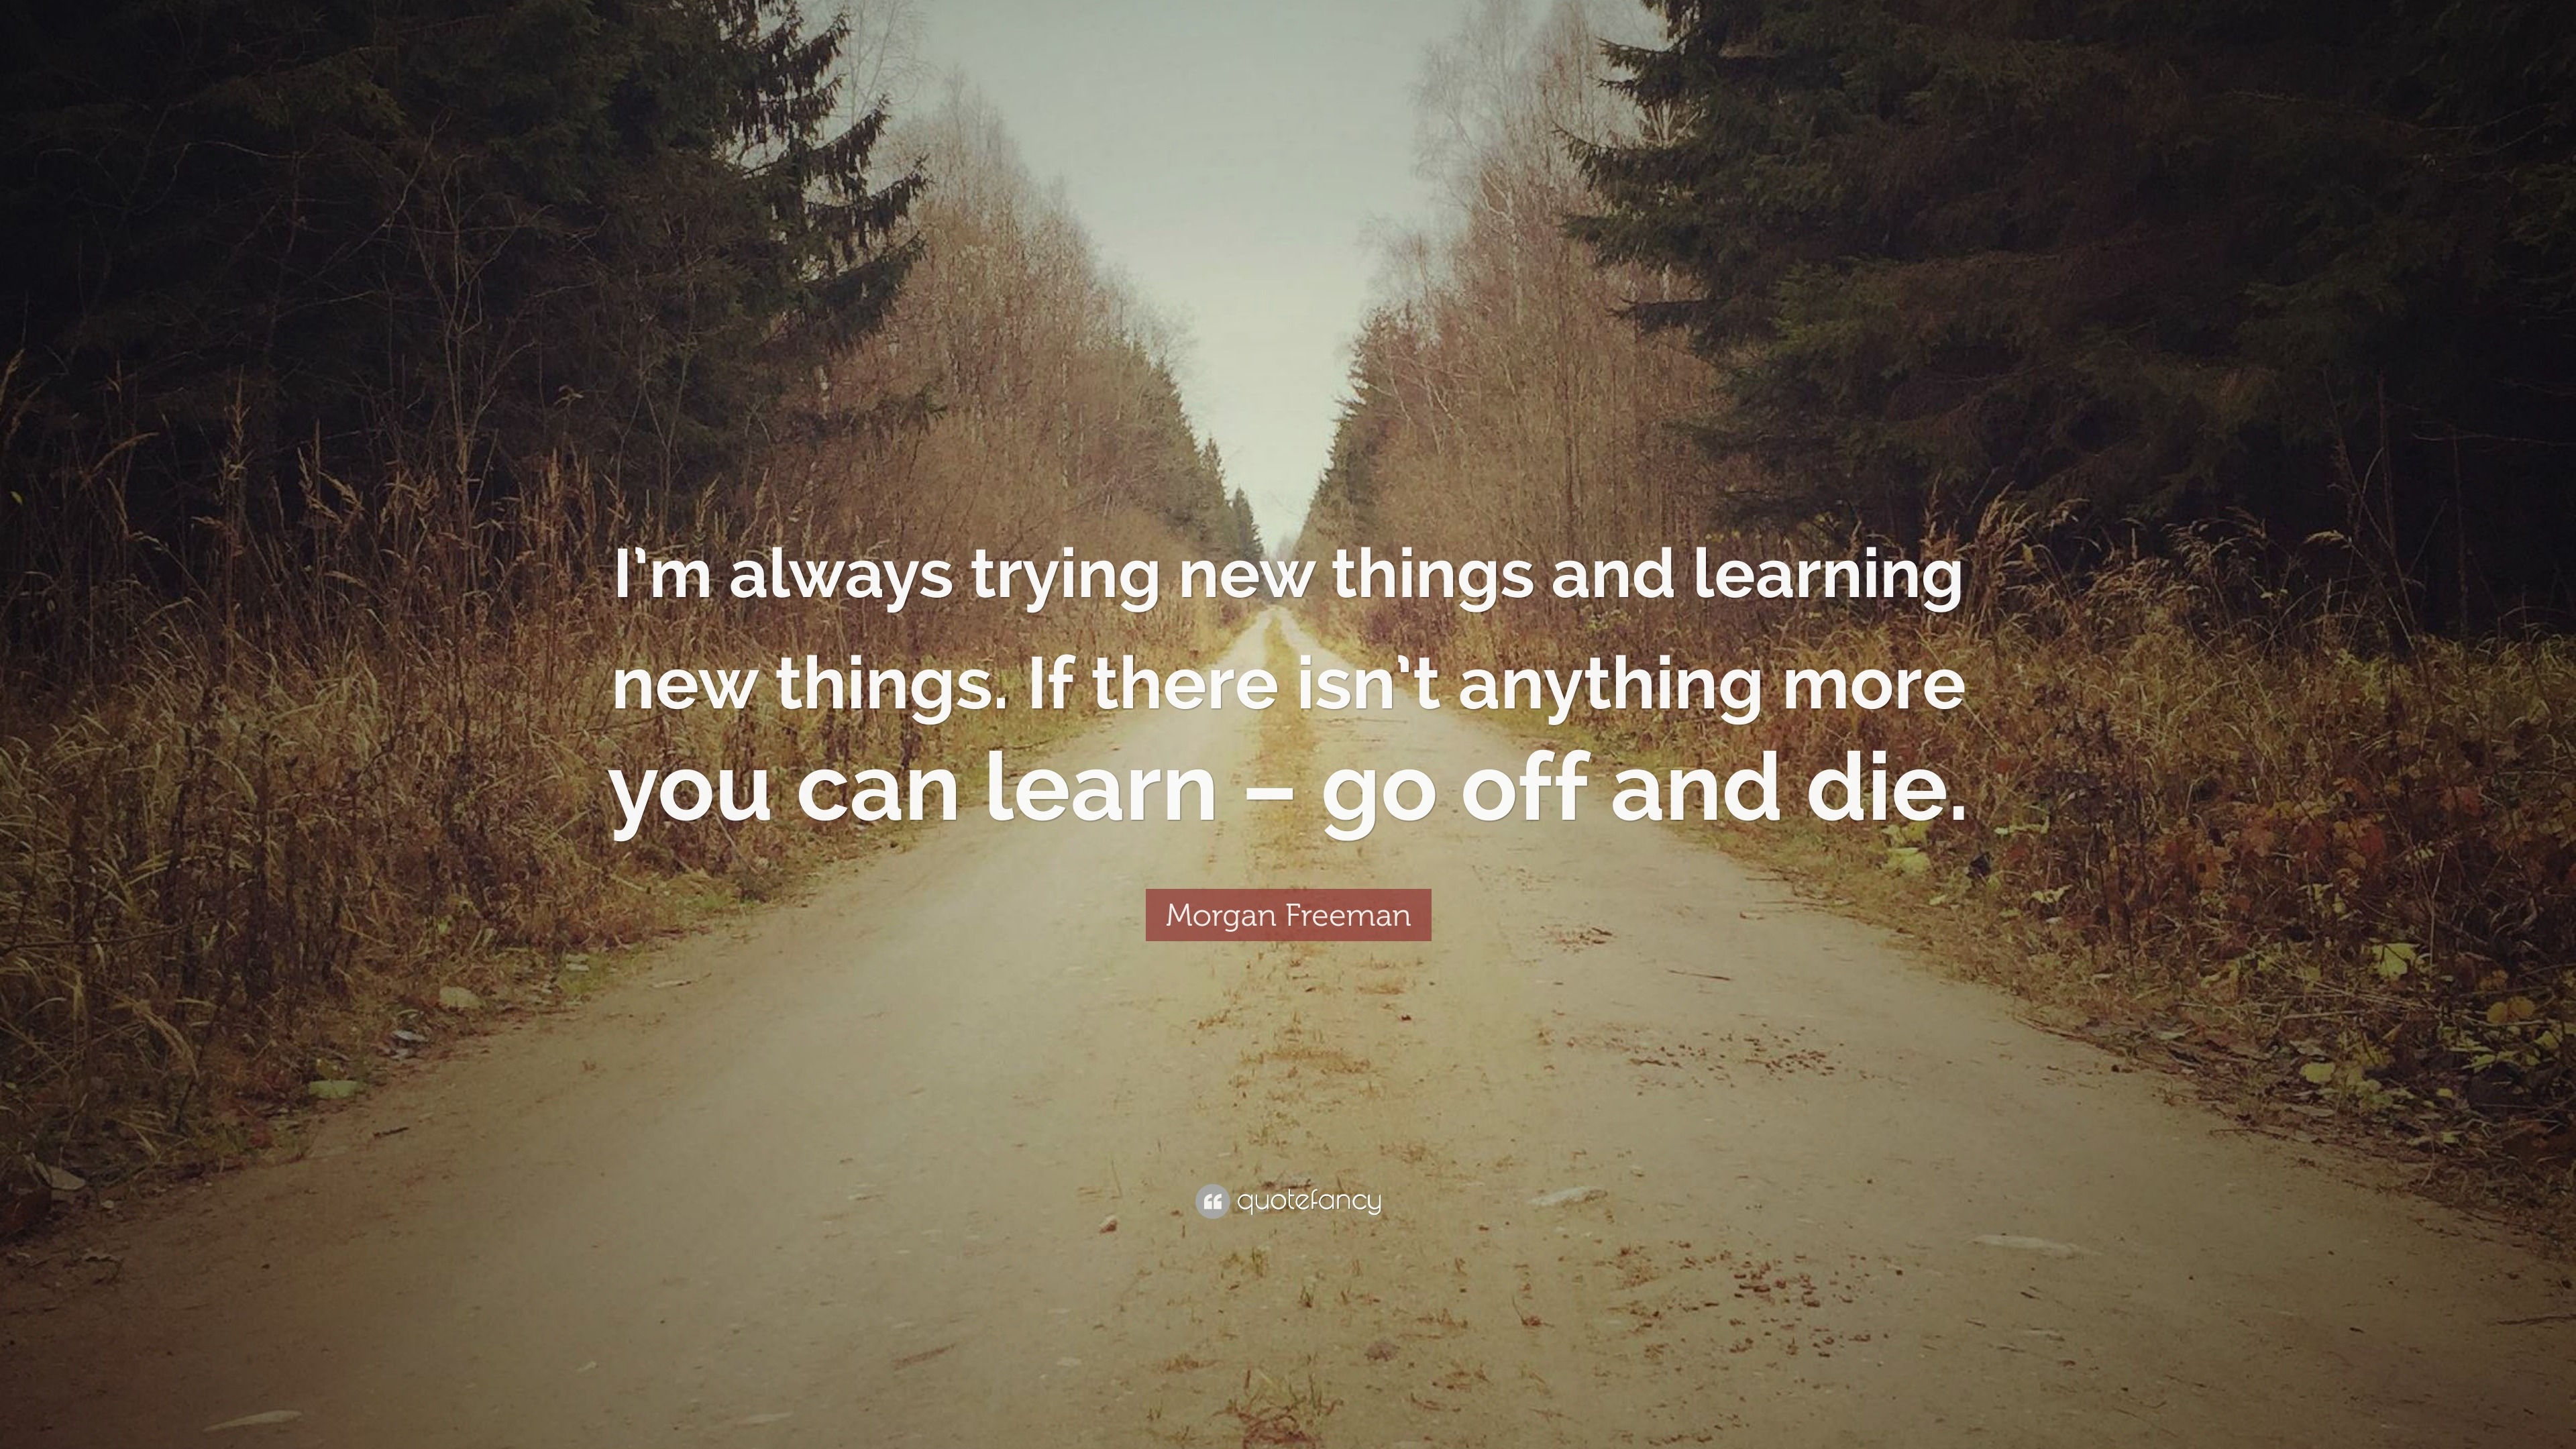 Morgan Freeman Quote: “I’m always trying new things and learning new